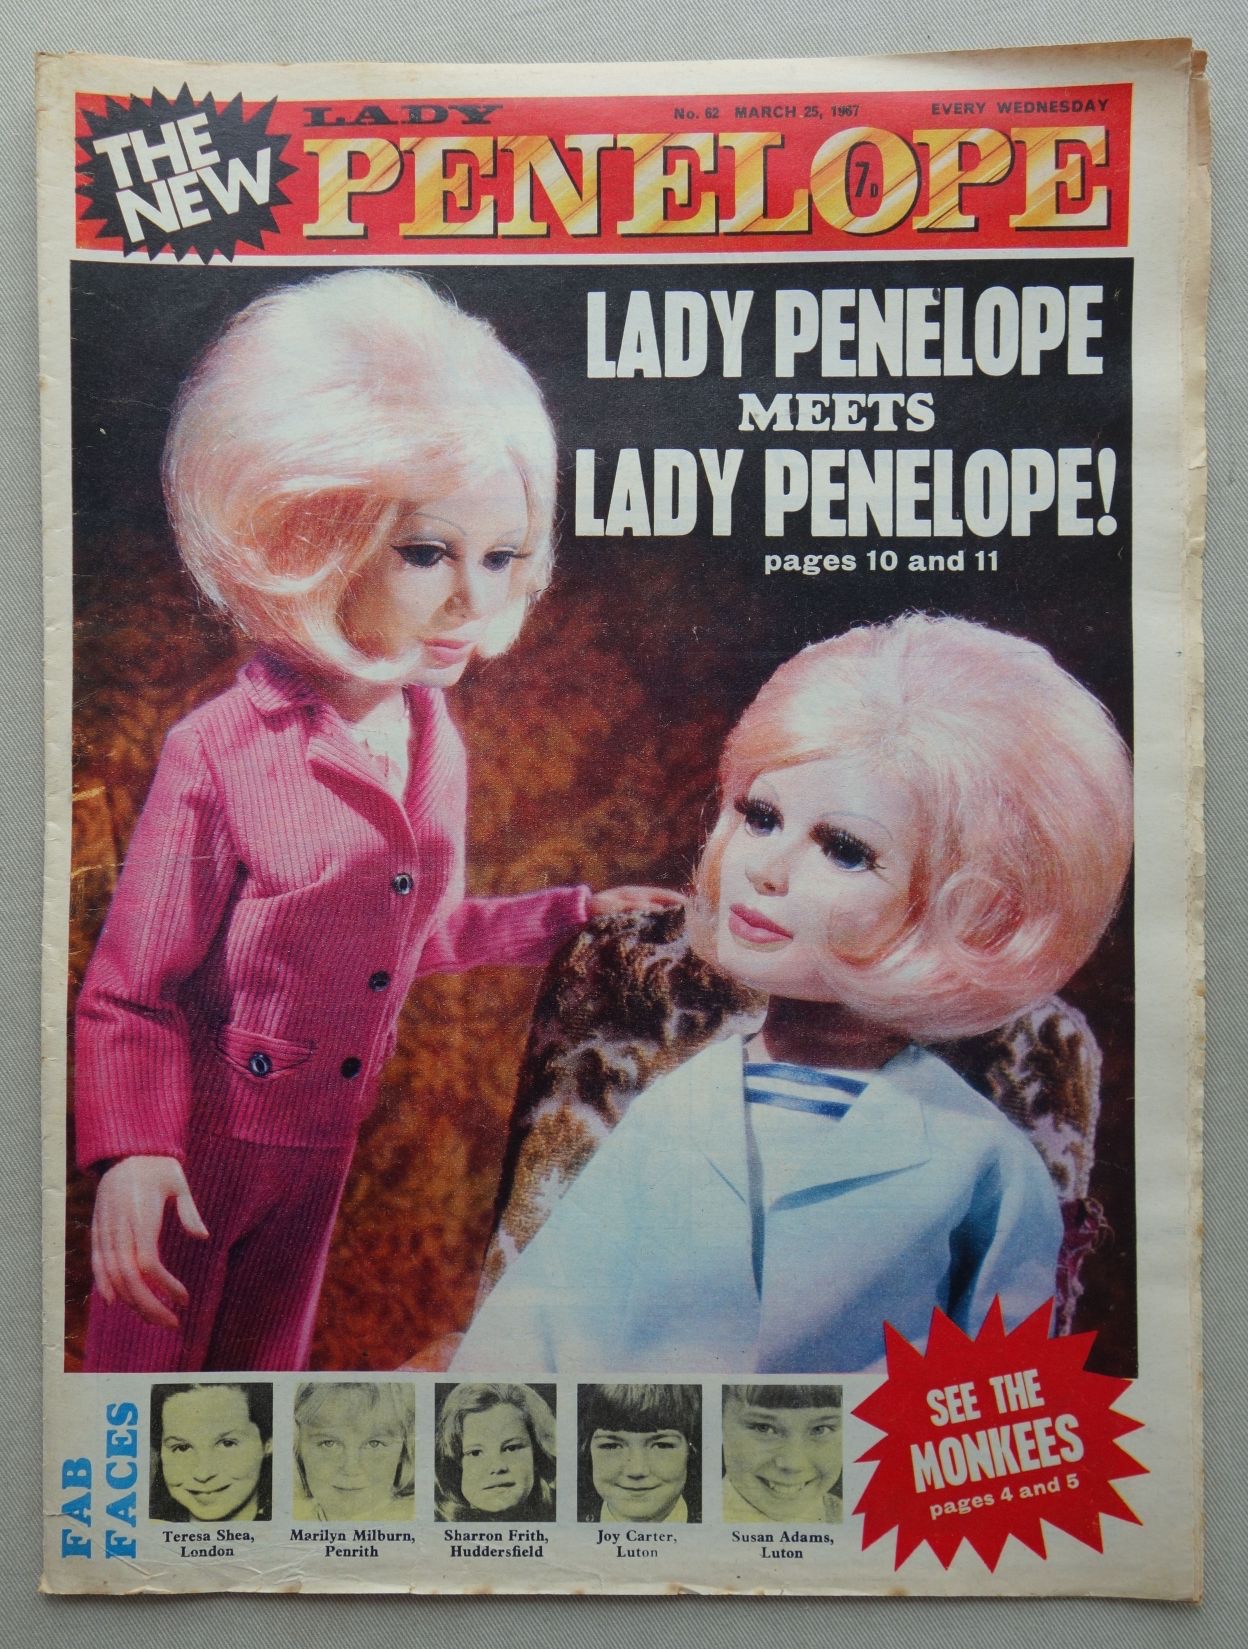 Lady Penelope No. 62, cover dated 25th March 1967